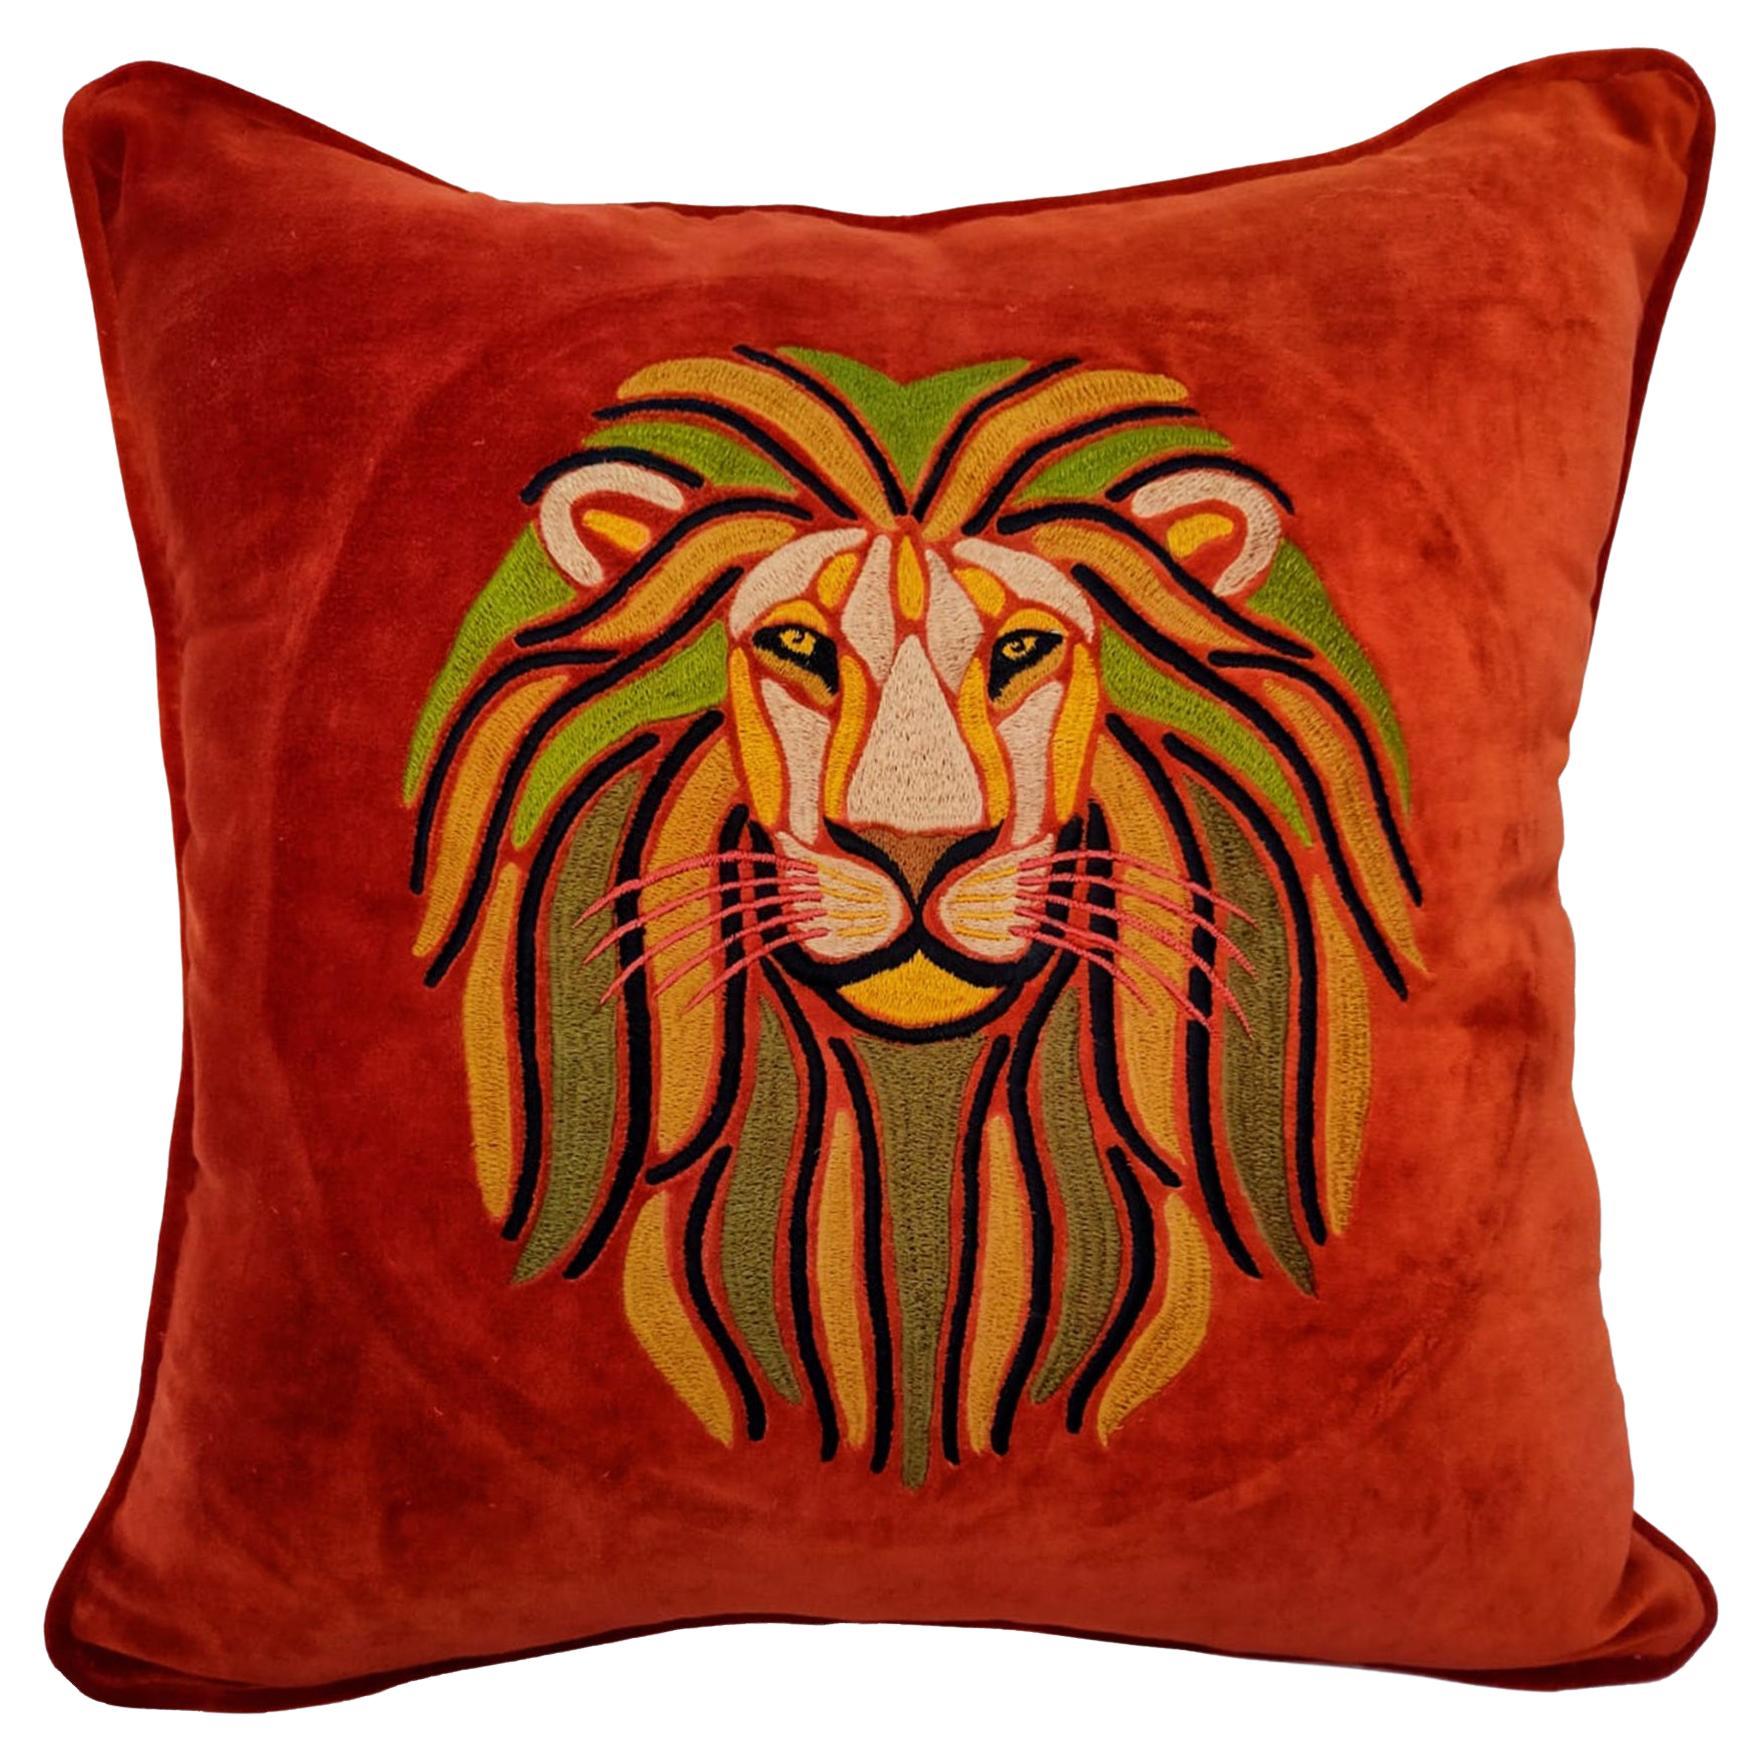 Hand Embroidered Lion pillow 